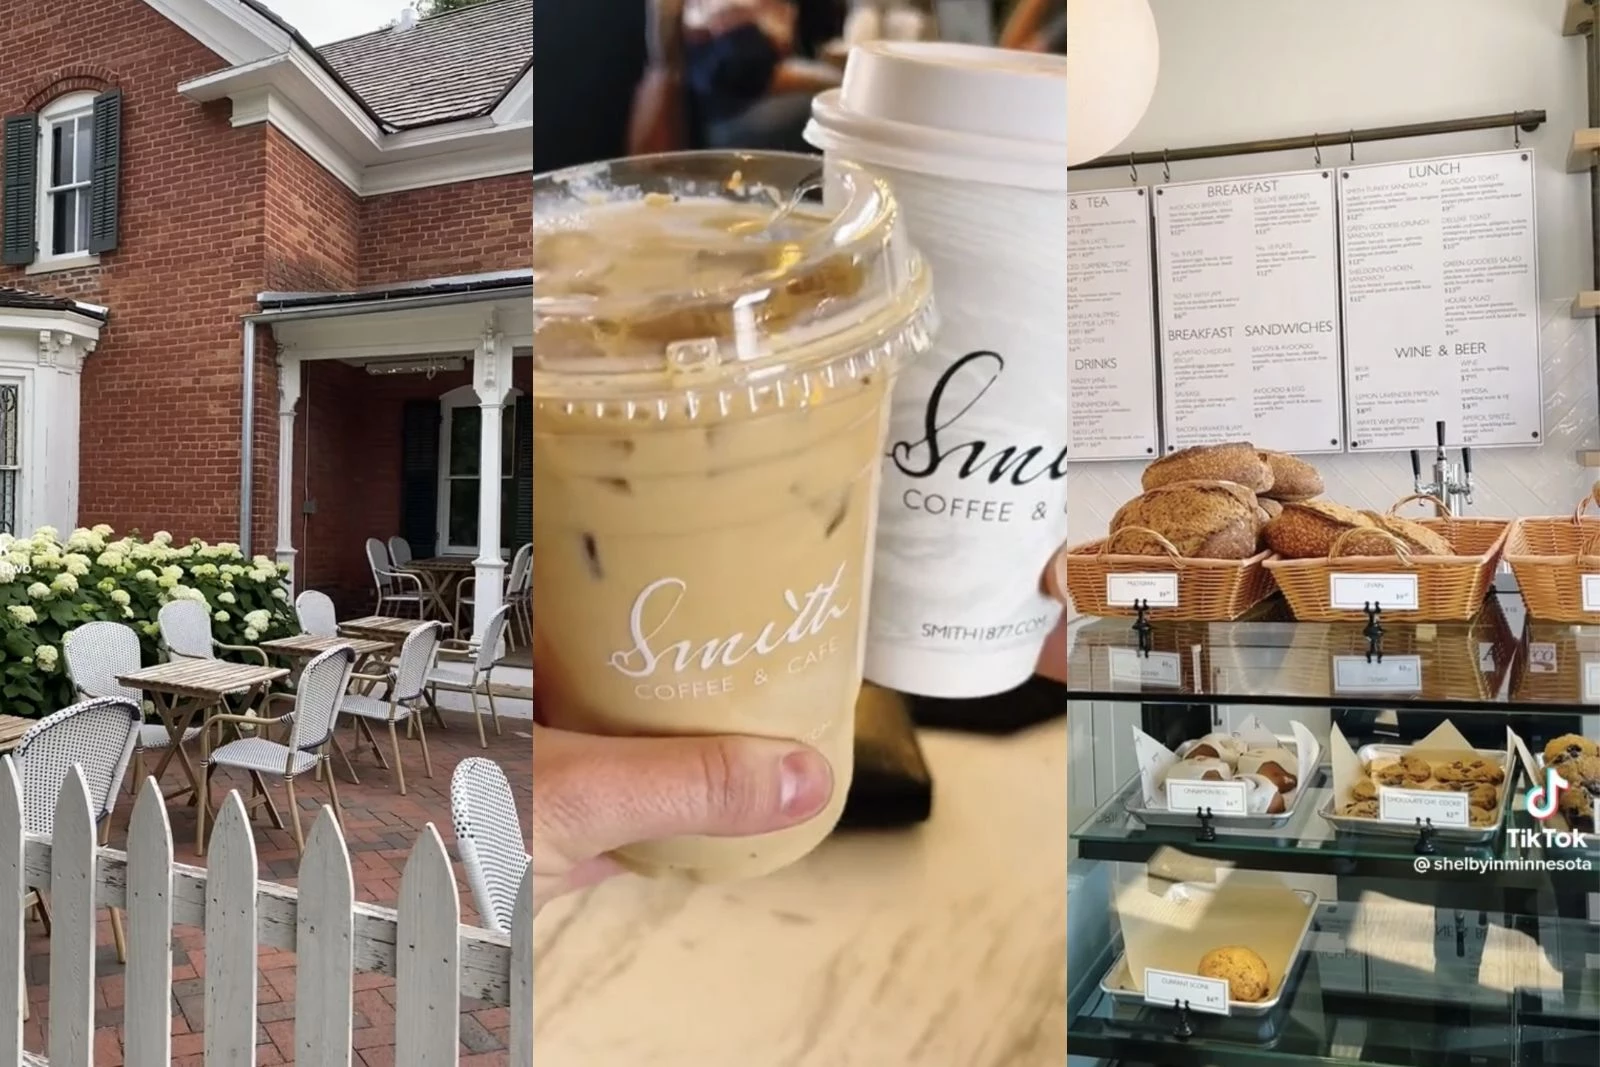 Minnesota's Cutest, Coziest, and Most Unique Coffee Shop and Café